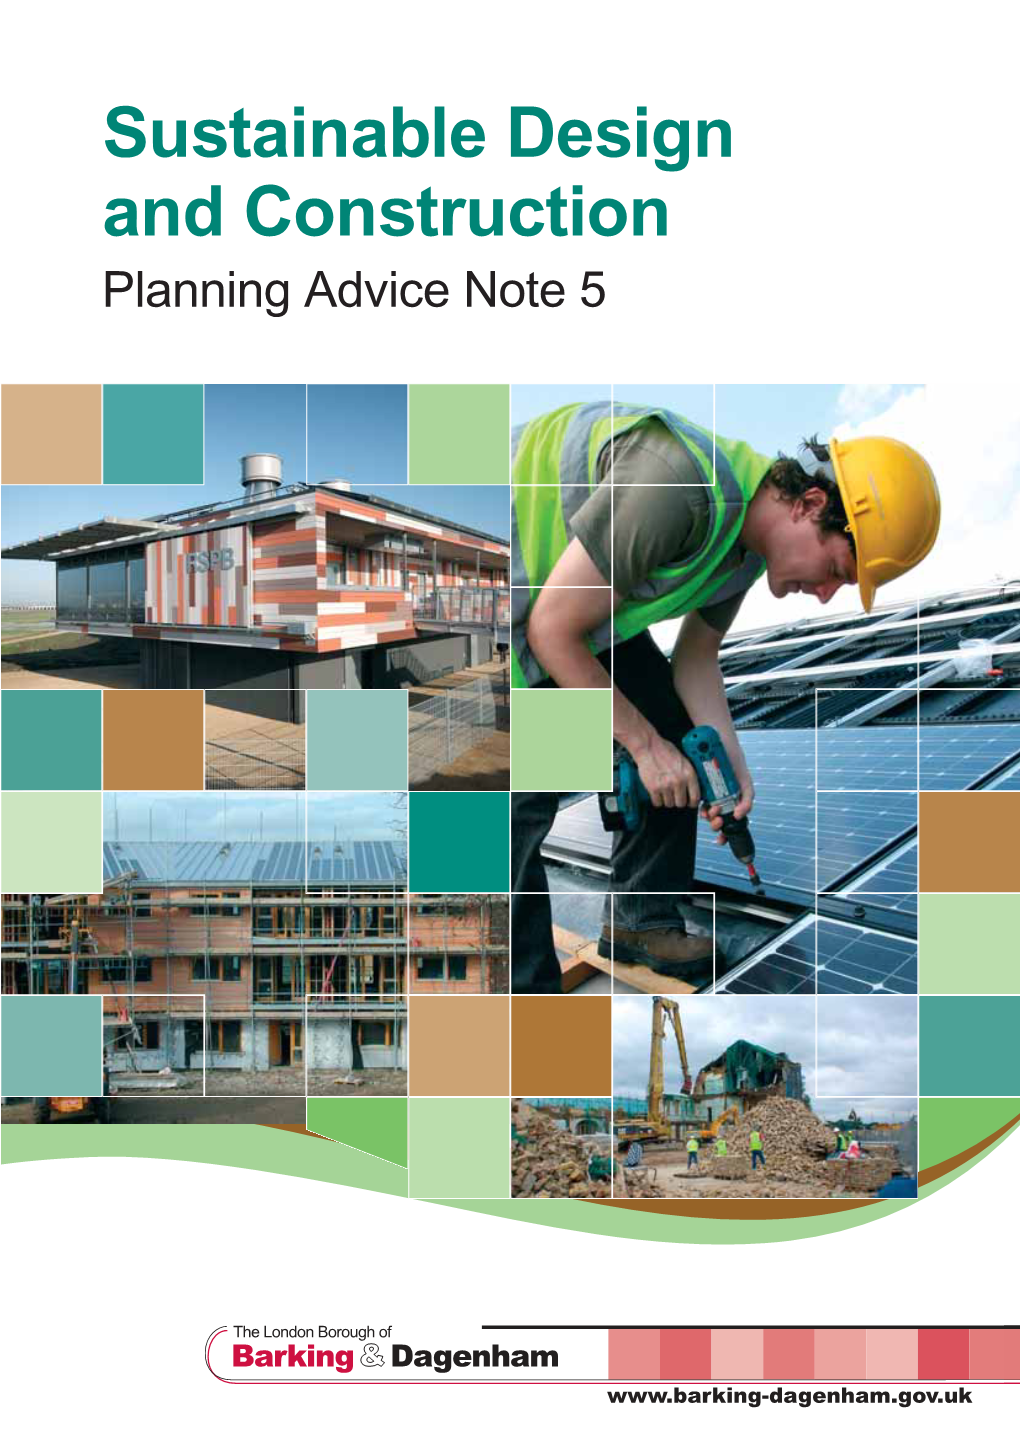 Sustainable Design and Construction Planning Advice Note 5